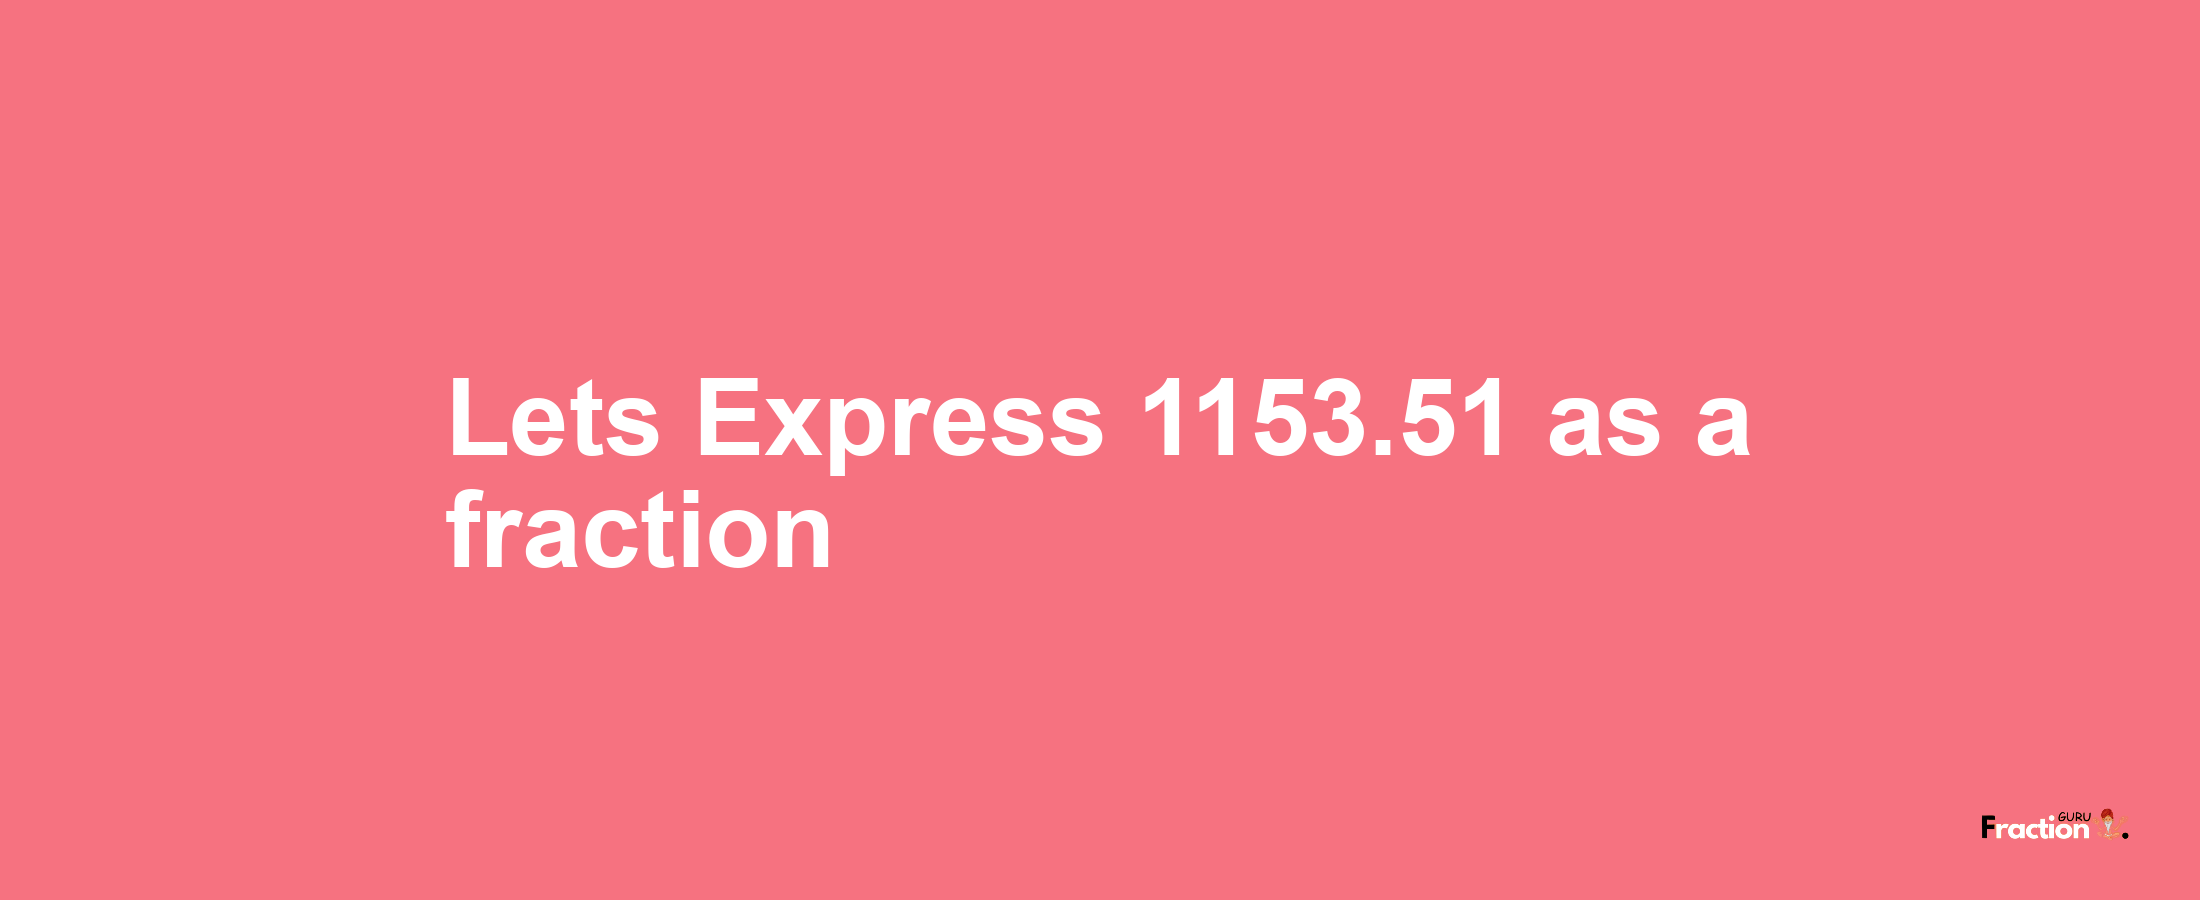 Lets Express 1153.51 as afraction